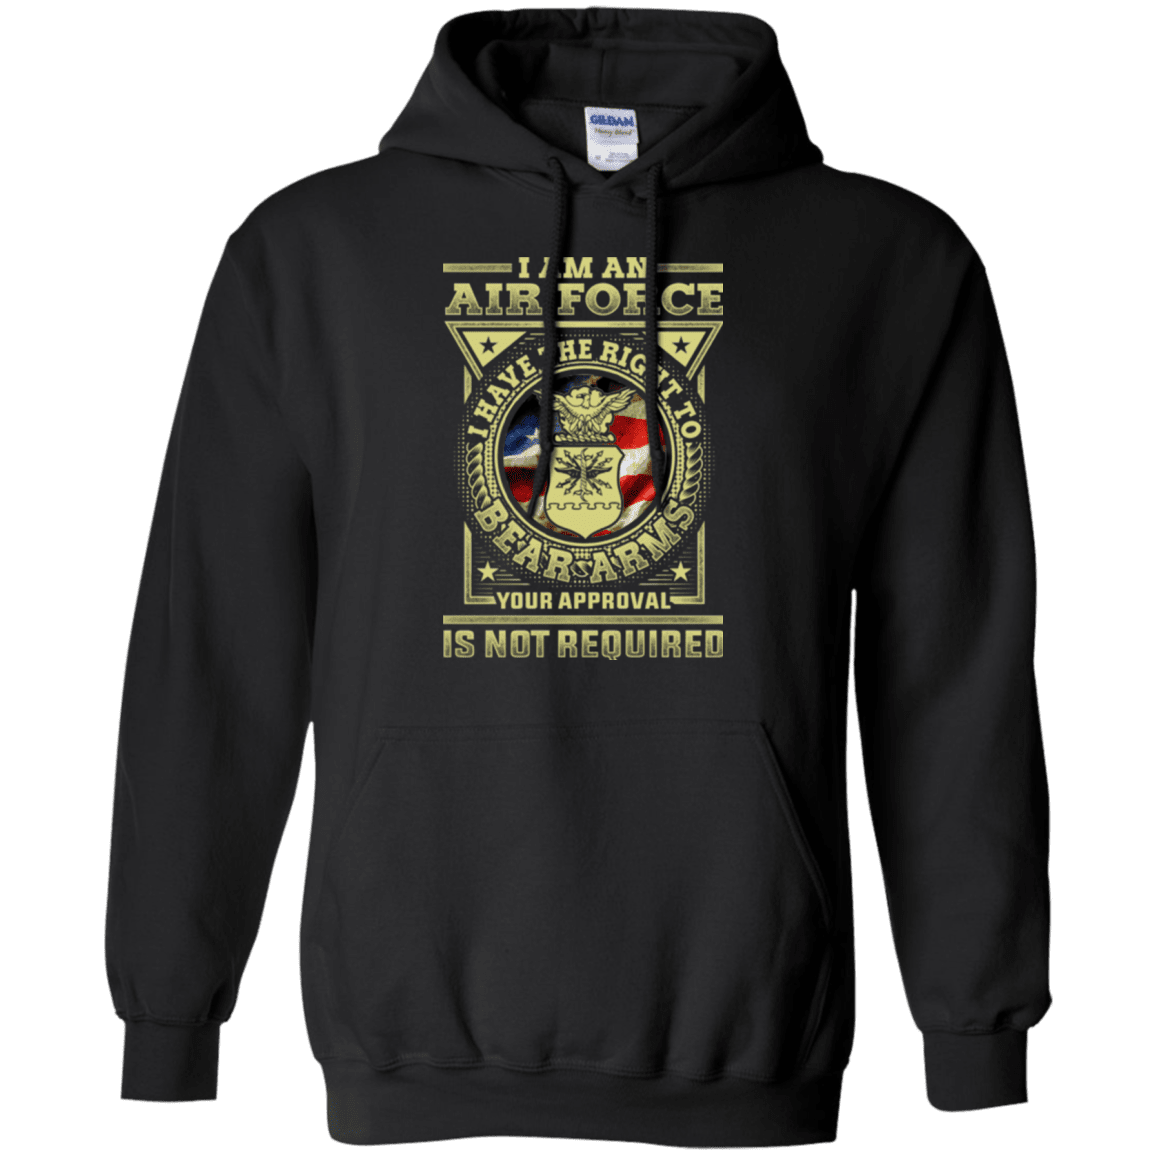 Military T-Shirt "AirForce Veteran Have the Right To Bear Arms Men" Front-TShirt-General-Veterans Nation